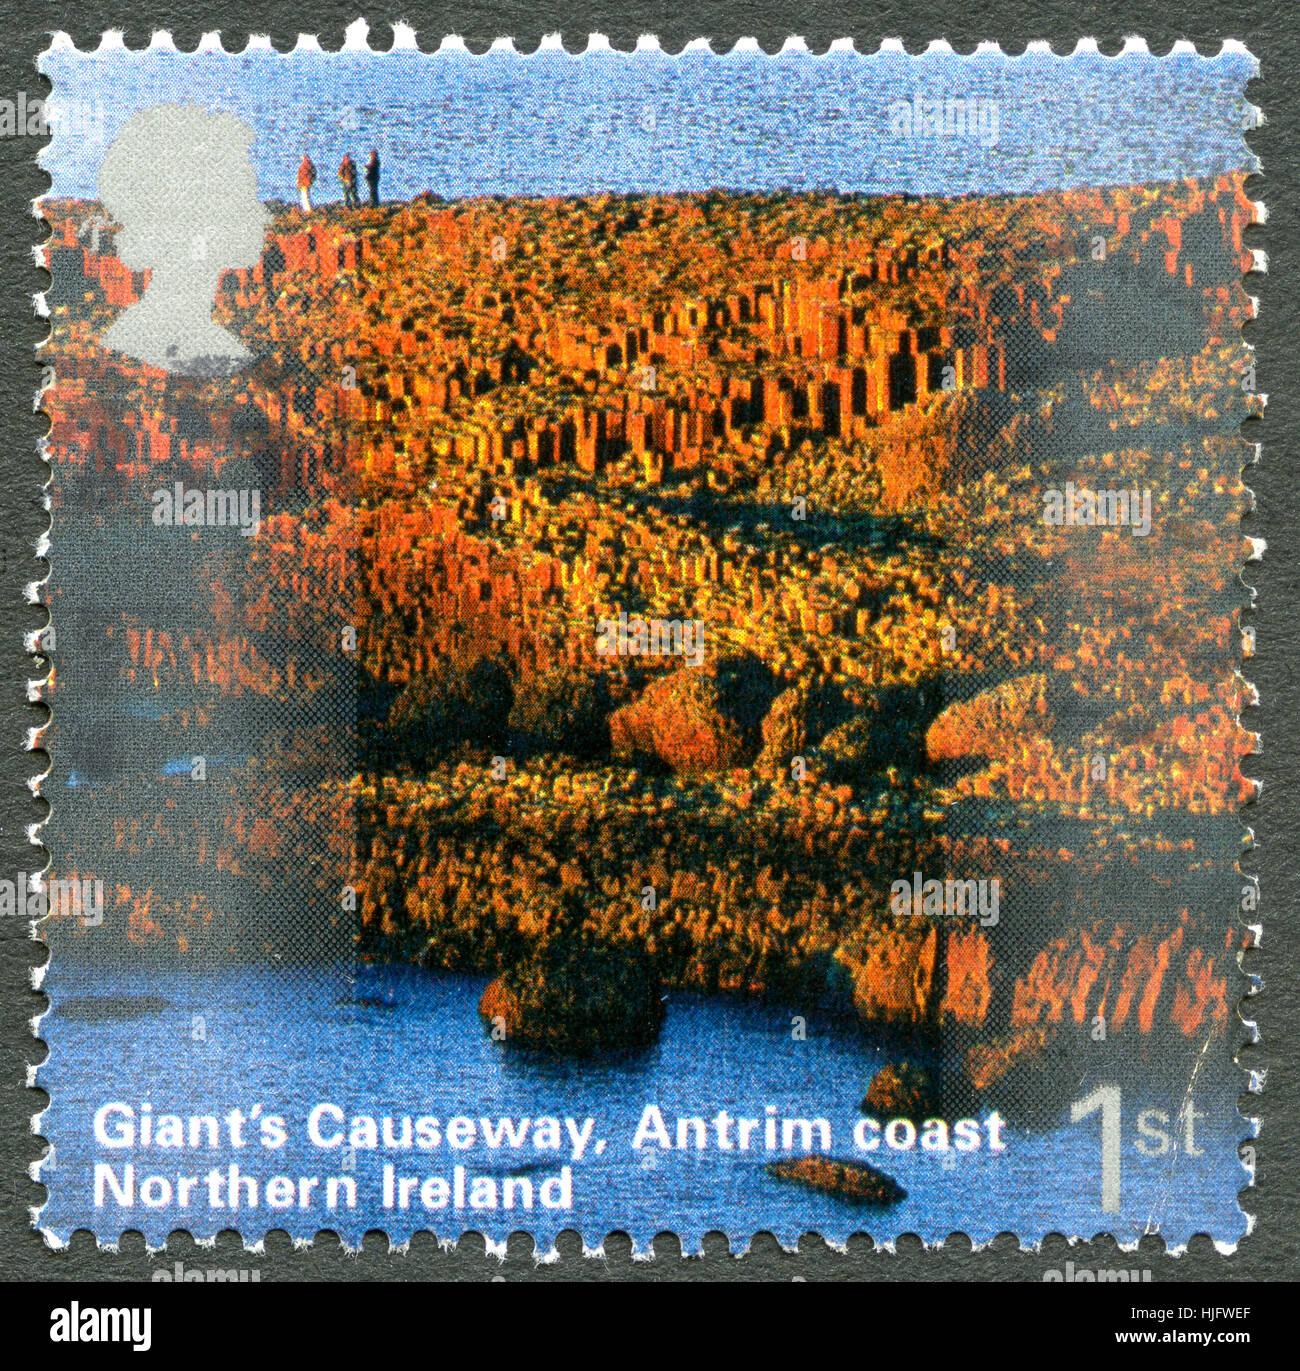 GREAT BRITAIN - CIRCA 2004: A used postage stamp from the UK, depicting an image of the Giants Causeway in Northern Ireland, circa 2004. Stock Photo